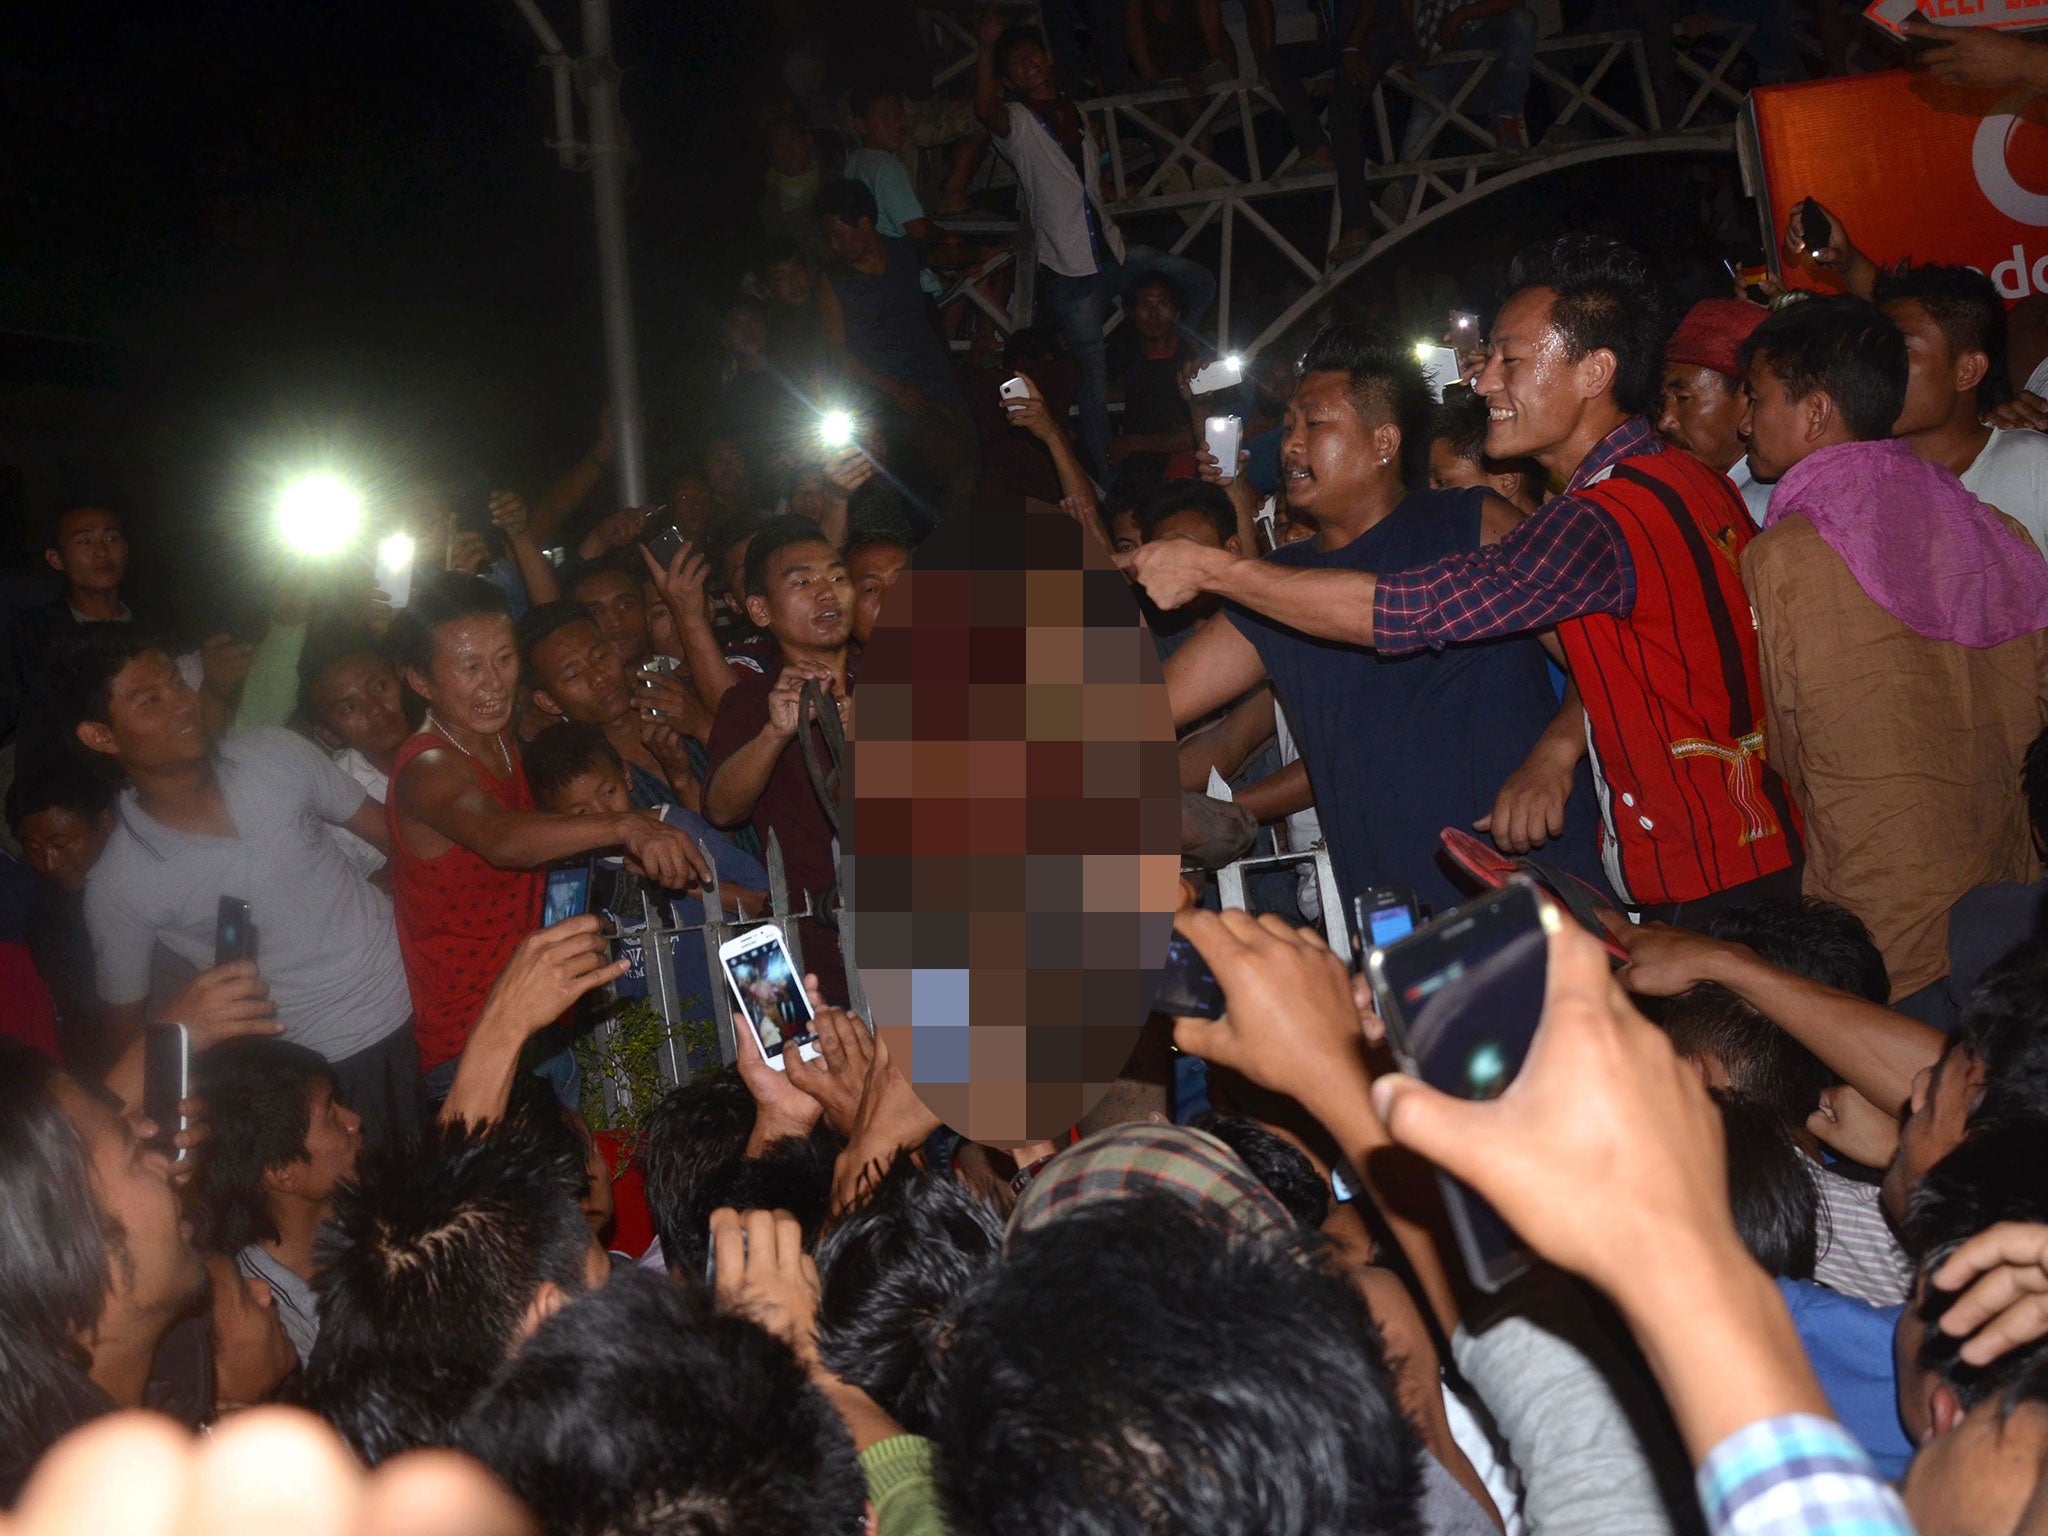 A crowd of Indian men surround an alleged rapist after he was dragged out of prison and beaten to death in Dimapur in the northeastern Indian state of Nagaland 